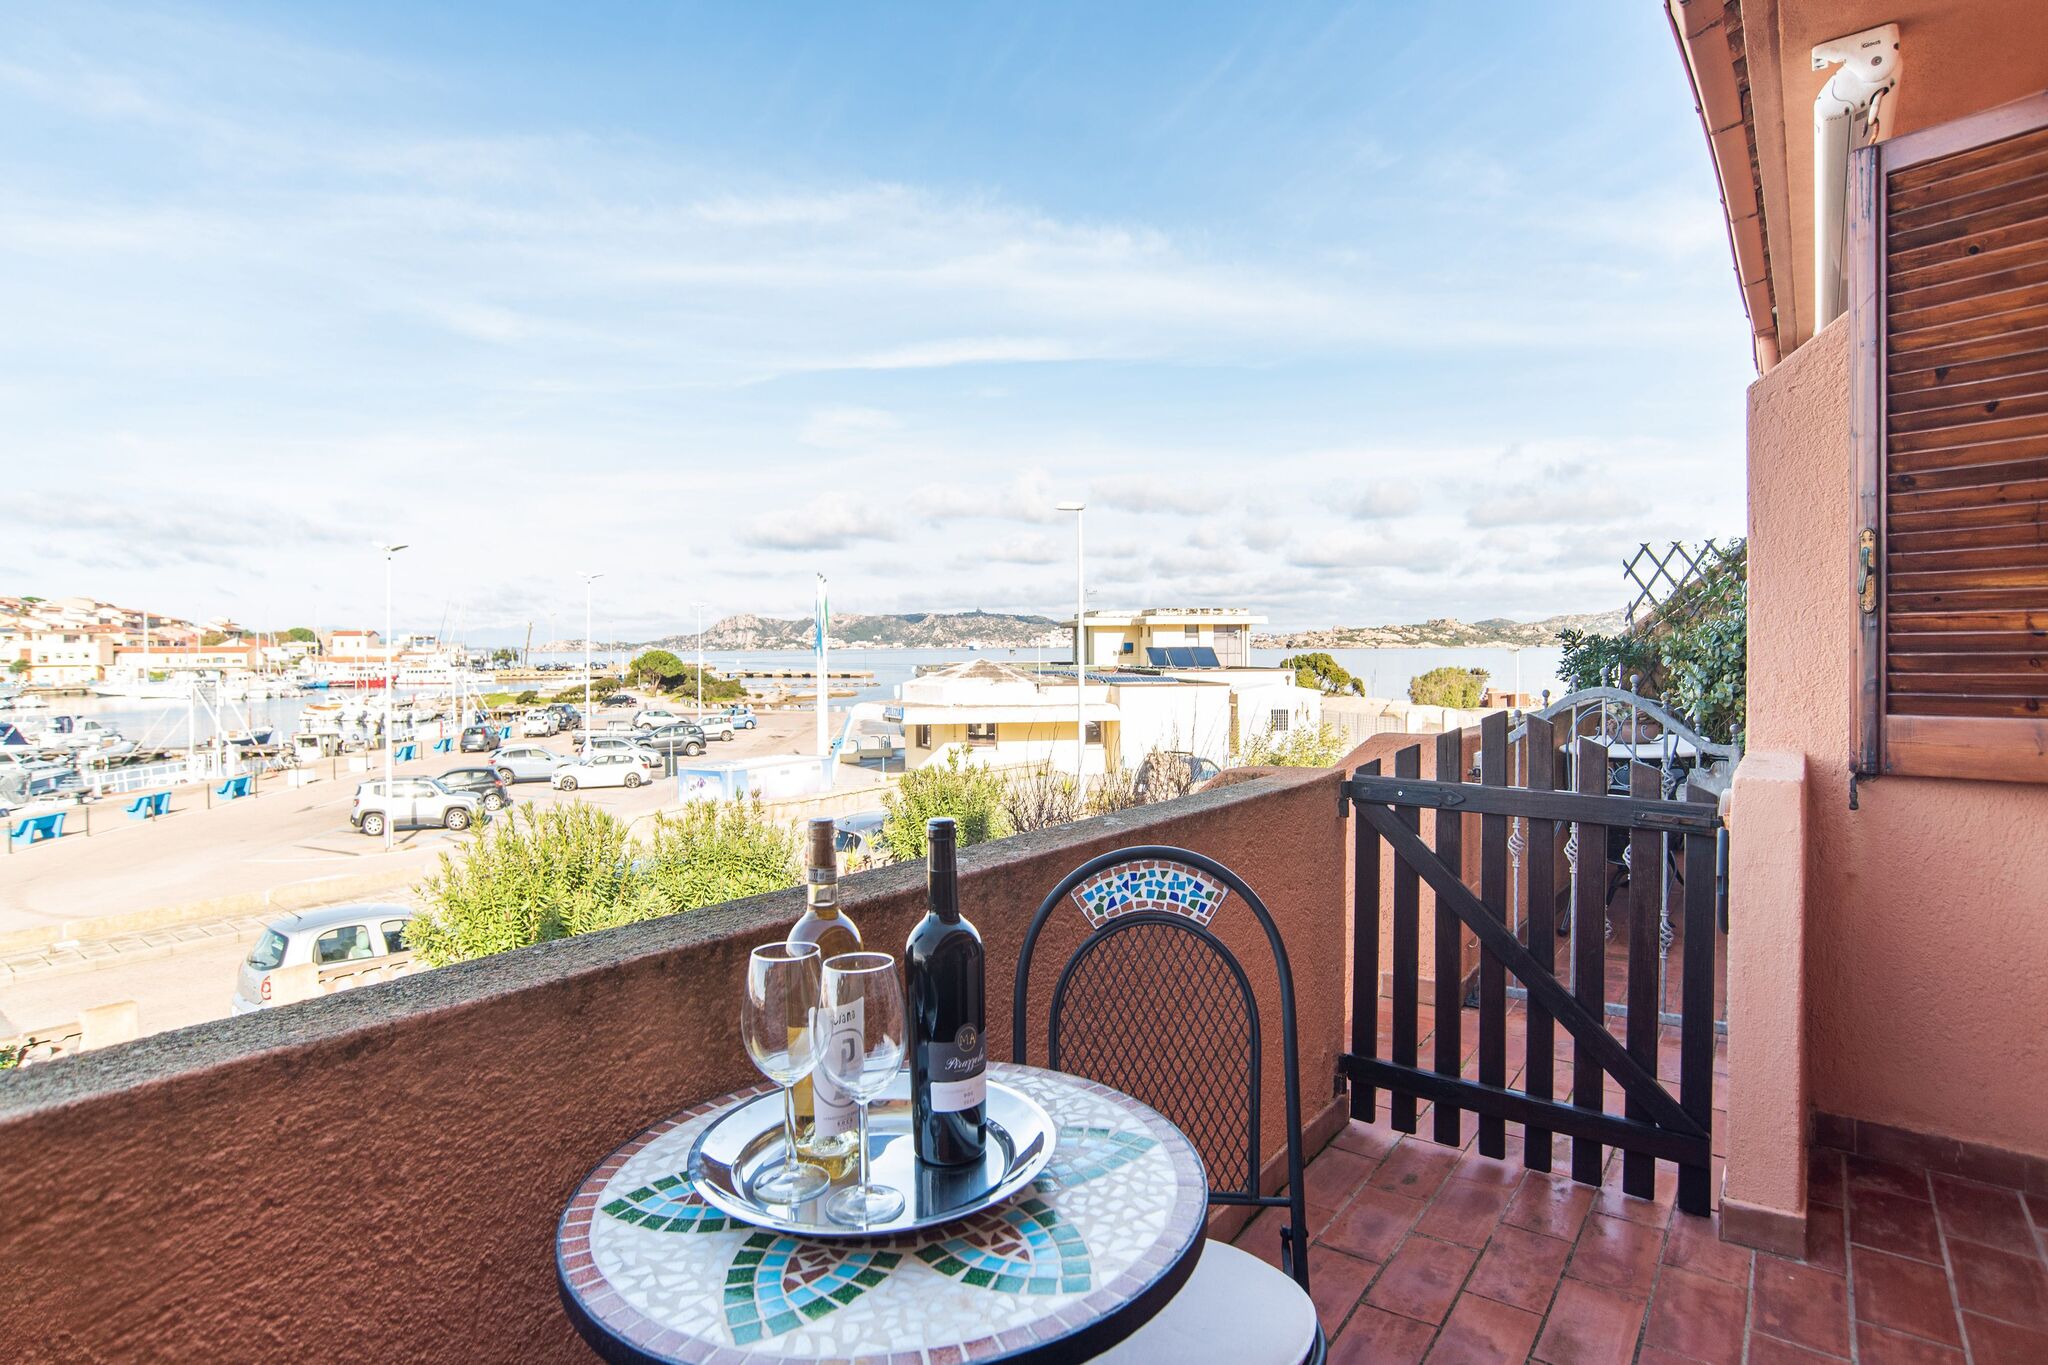 Seafront apartment in Sardegna with an amazing view, air-conditioned